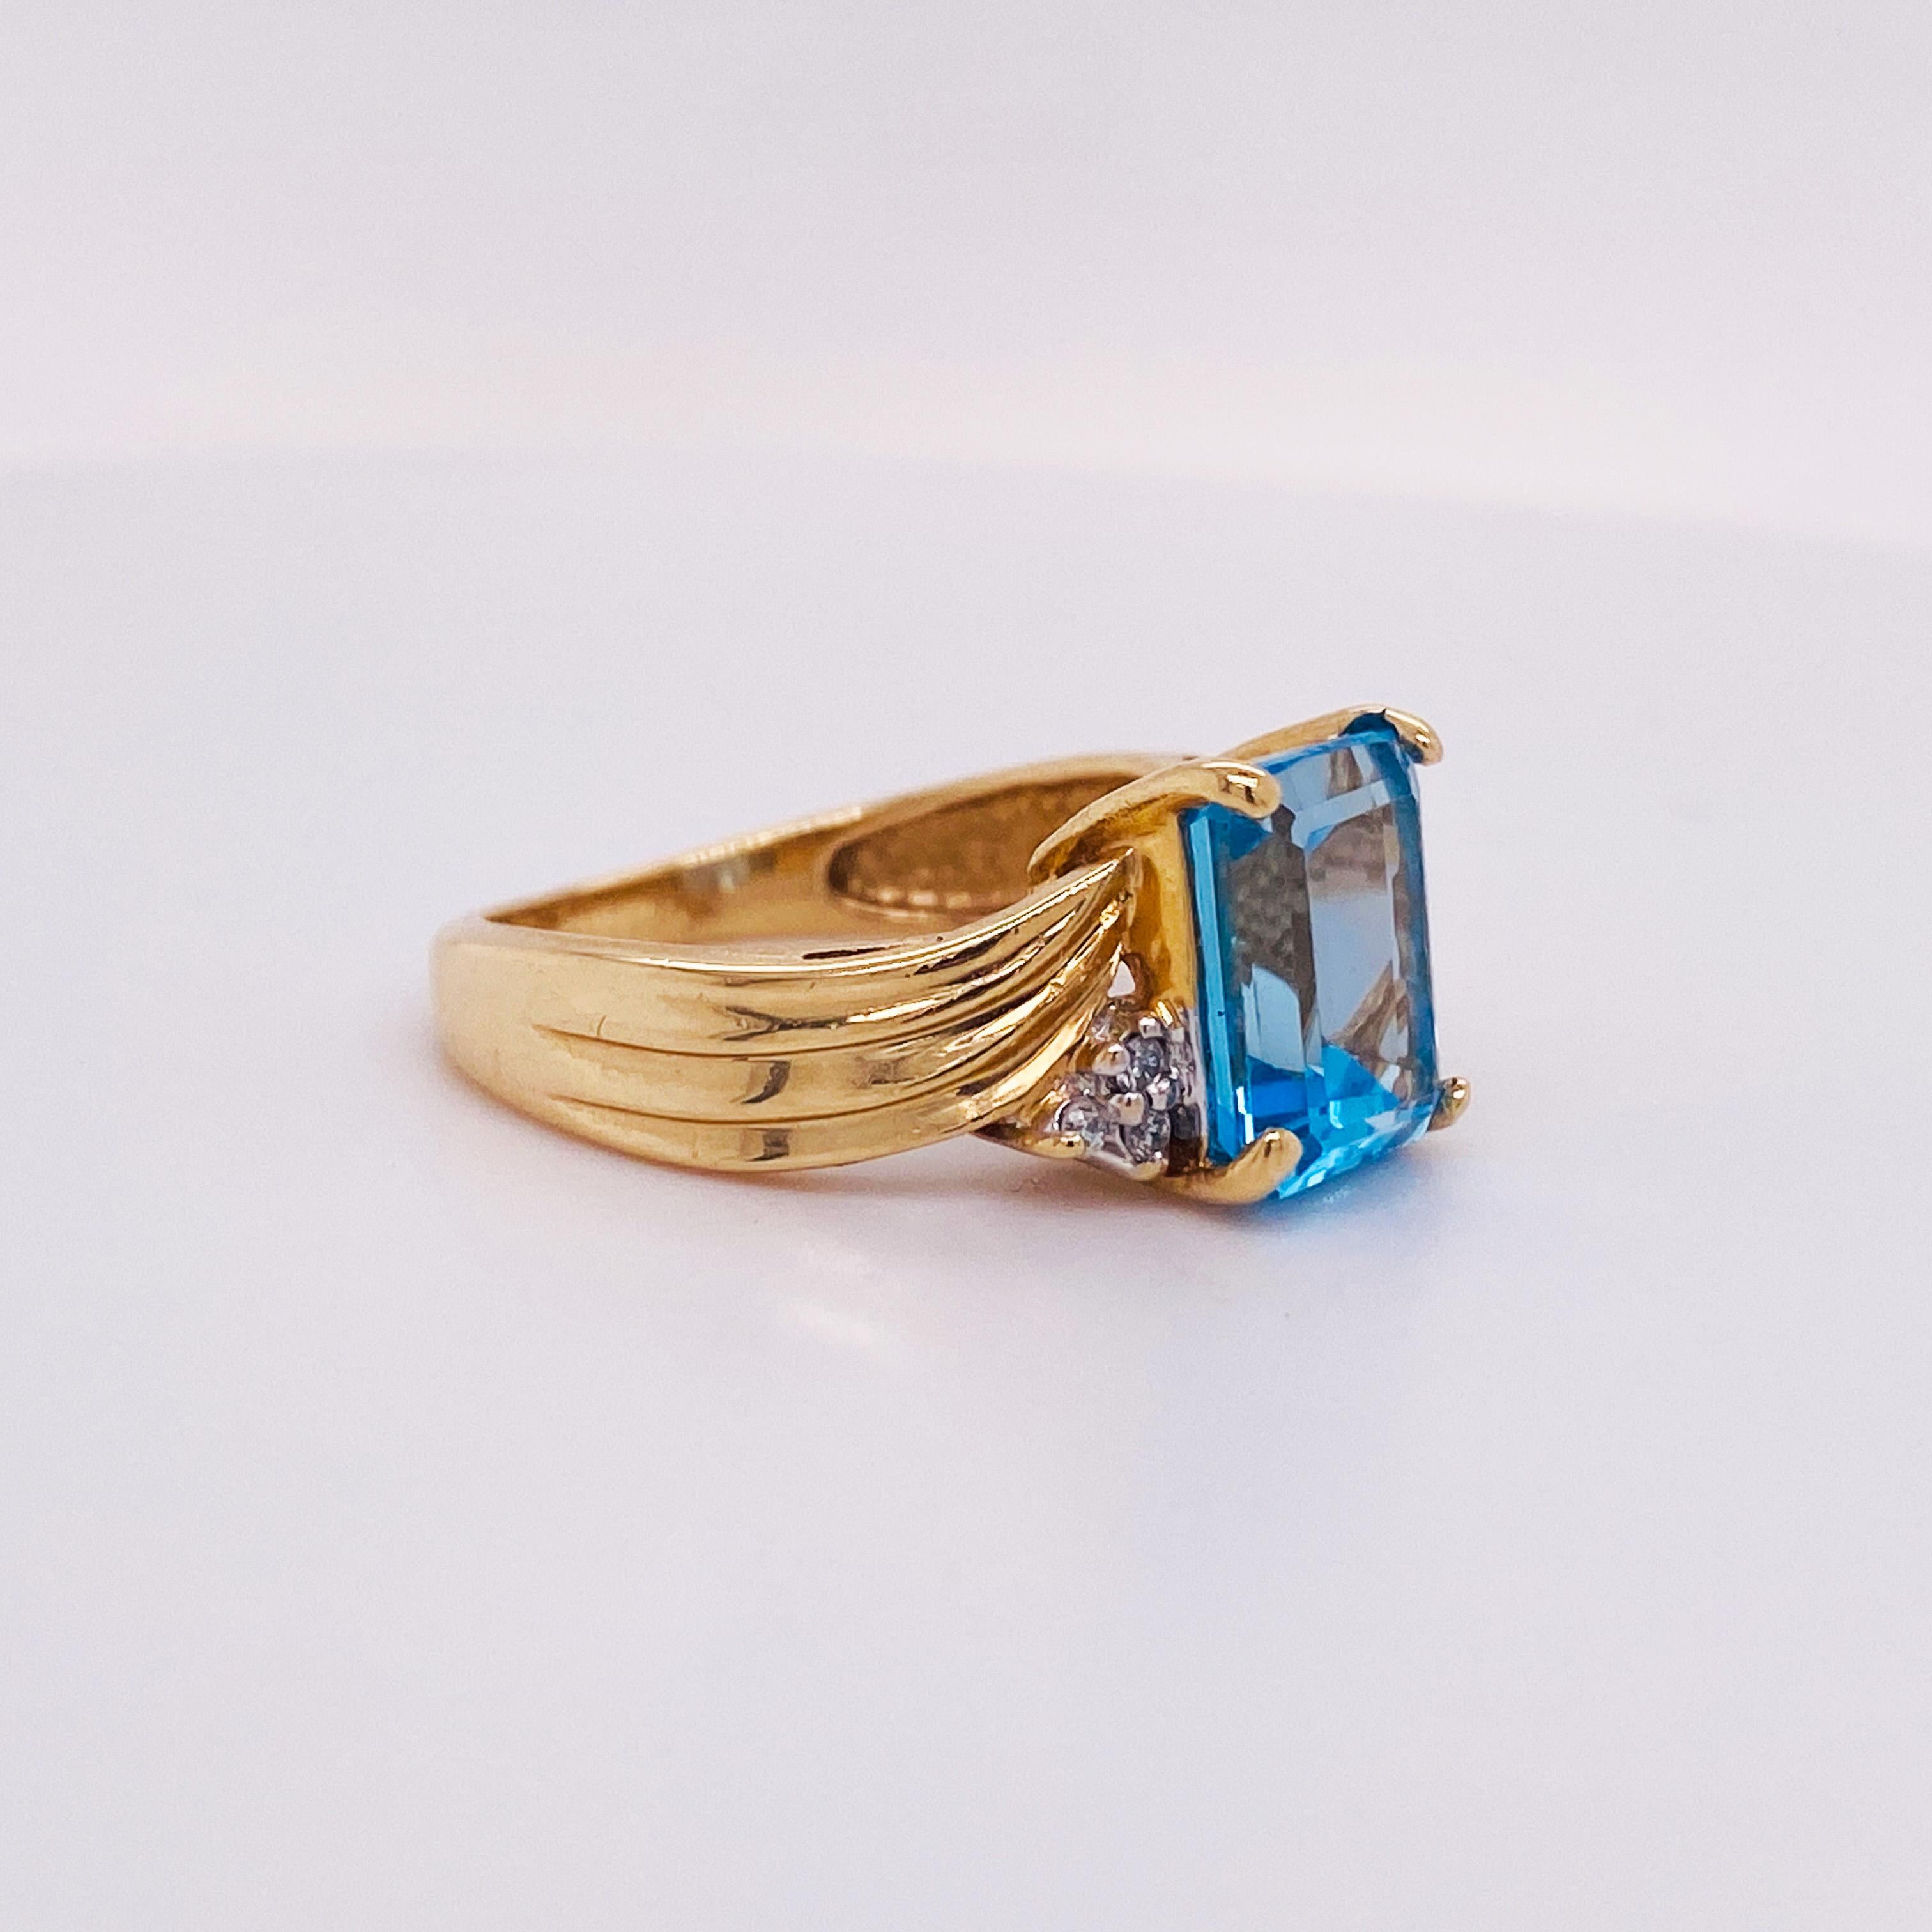 Contemporary 2.05 Carat Bright Ocean Blue Topaz, 14k Gold Wave Ring with Diamond Accents For Sale